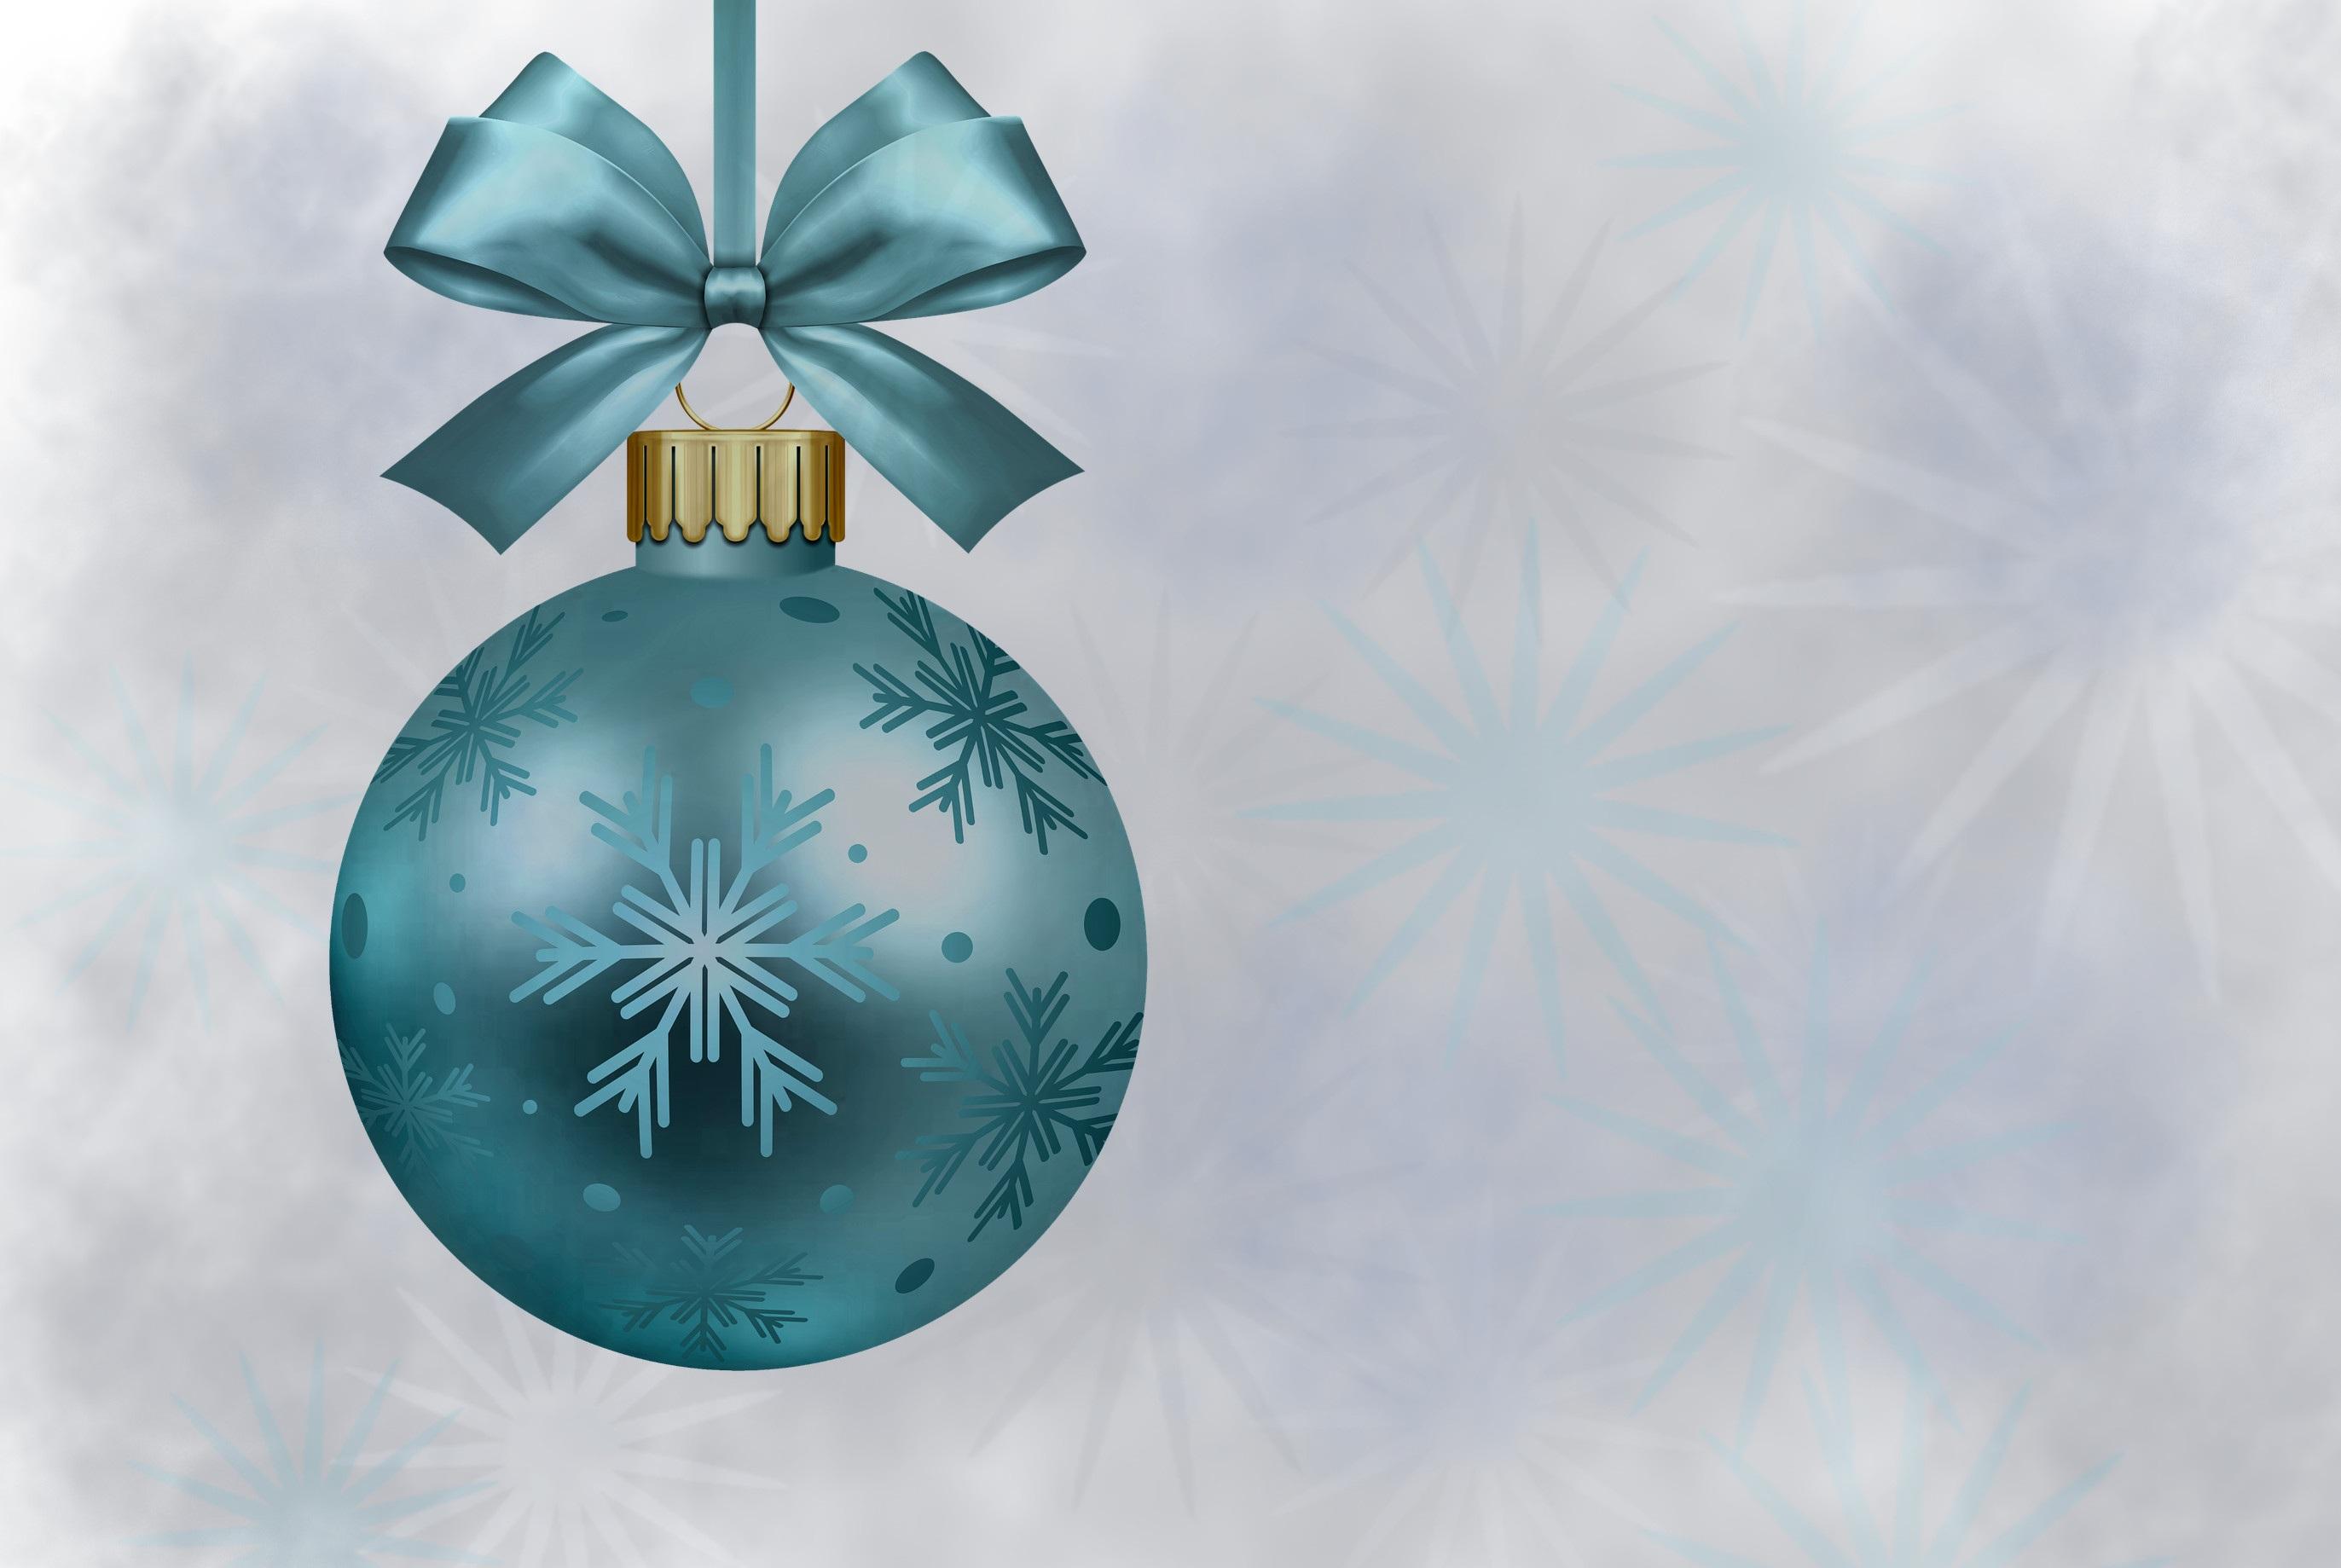 Blue Christmas Bauble HD Wallpaper. Background Image